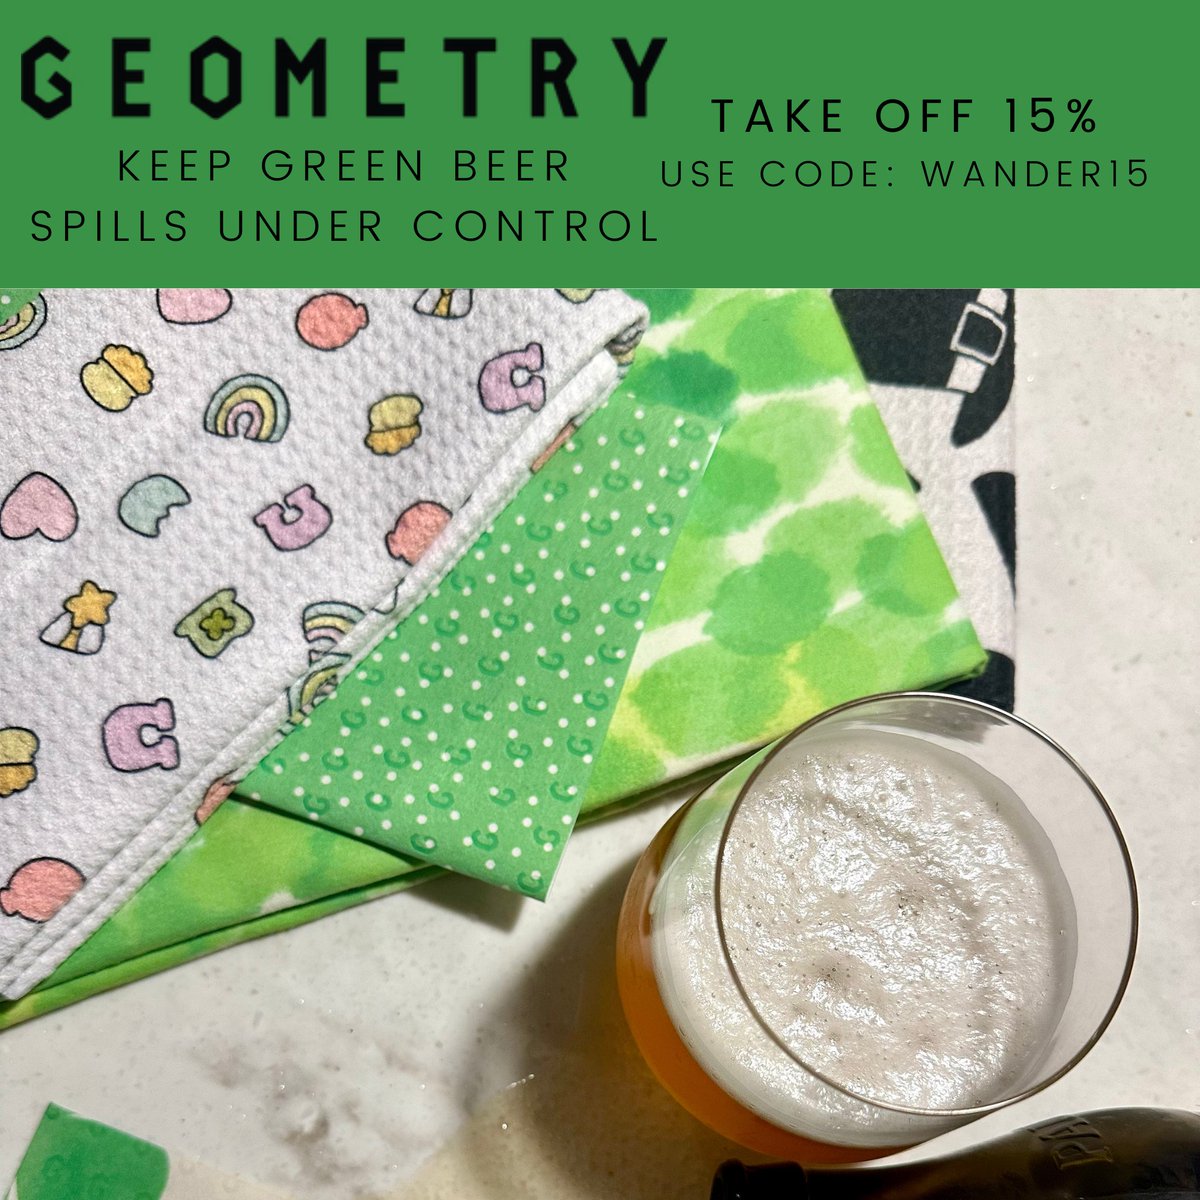 Introducing these adorable towels from @GeometryHouse , perfect for all your St. Patty's Day needs. Made from post-consumer recycled materials, you can feel good about using them all year round! geom.crrnt.app/wbM-eAwK Wander15 for 15% off St. Patty's designs + more